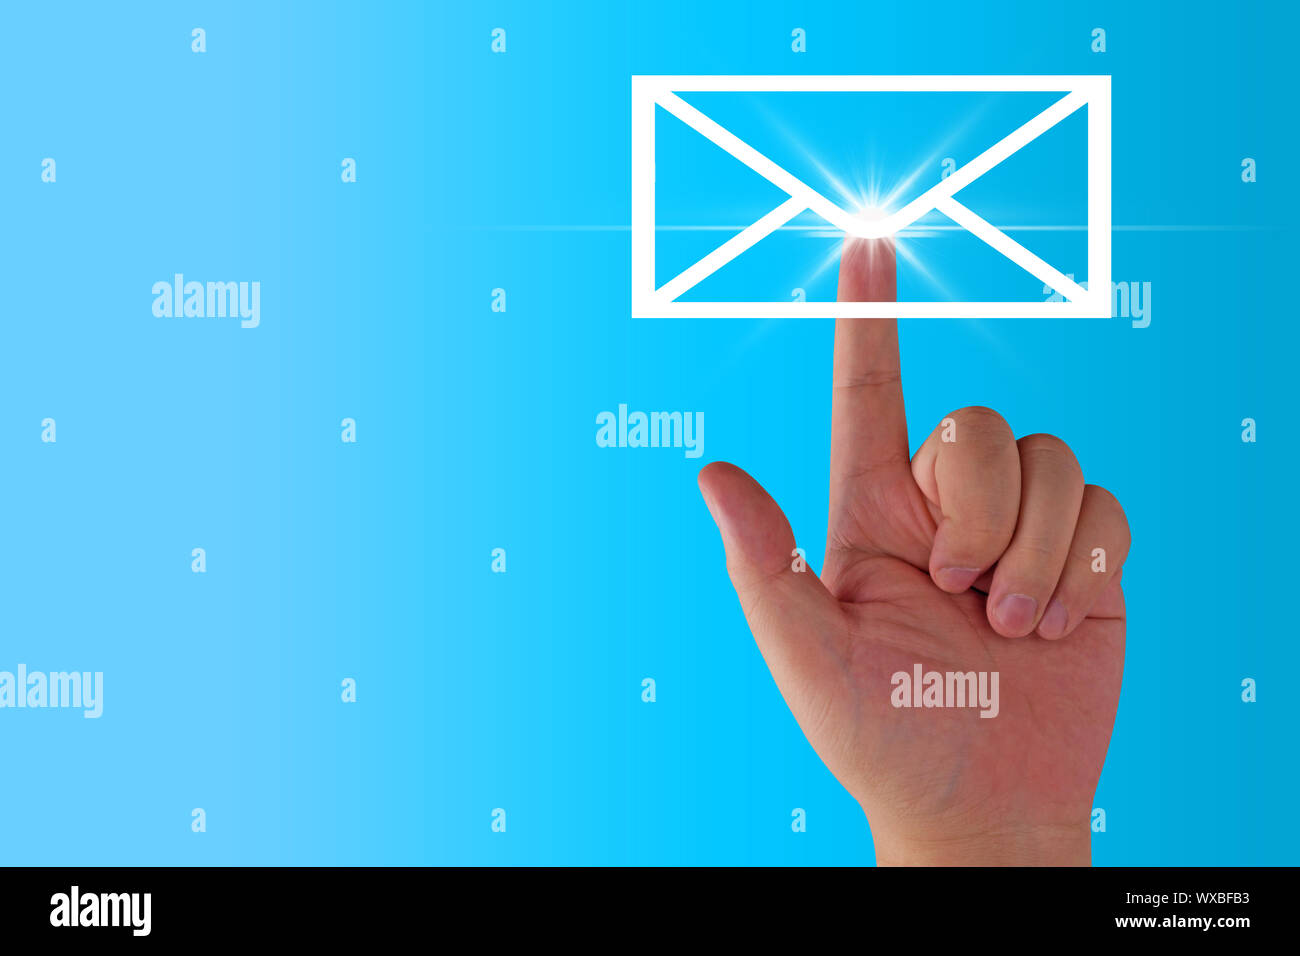 Email concept, hand and envelope icon on blue background Stock Photo